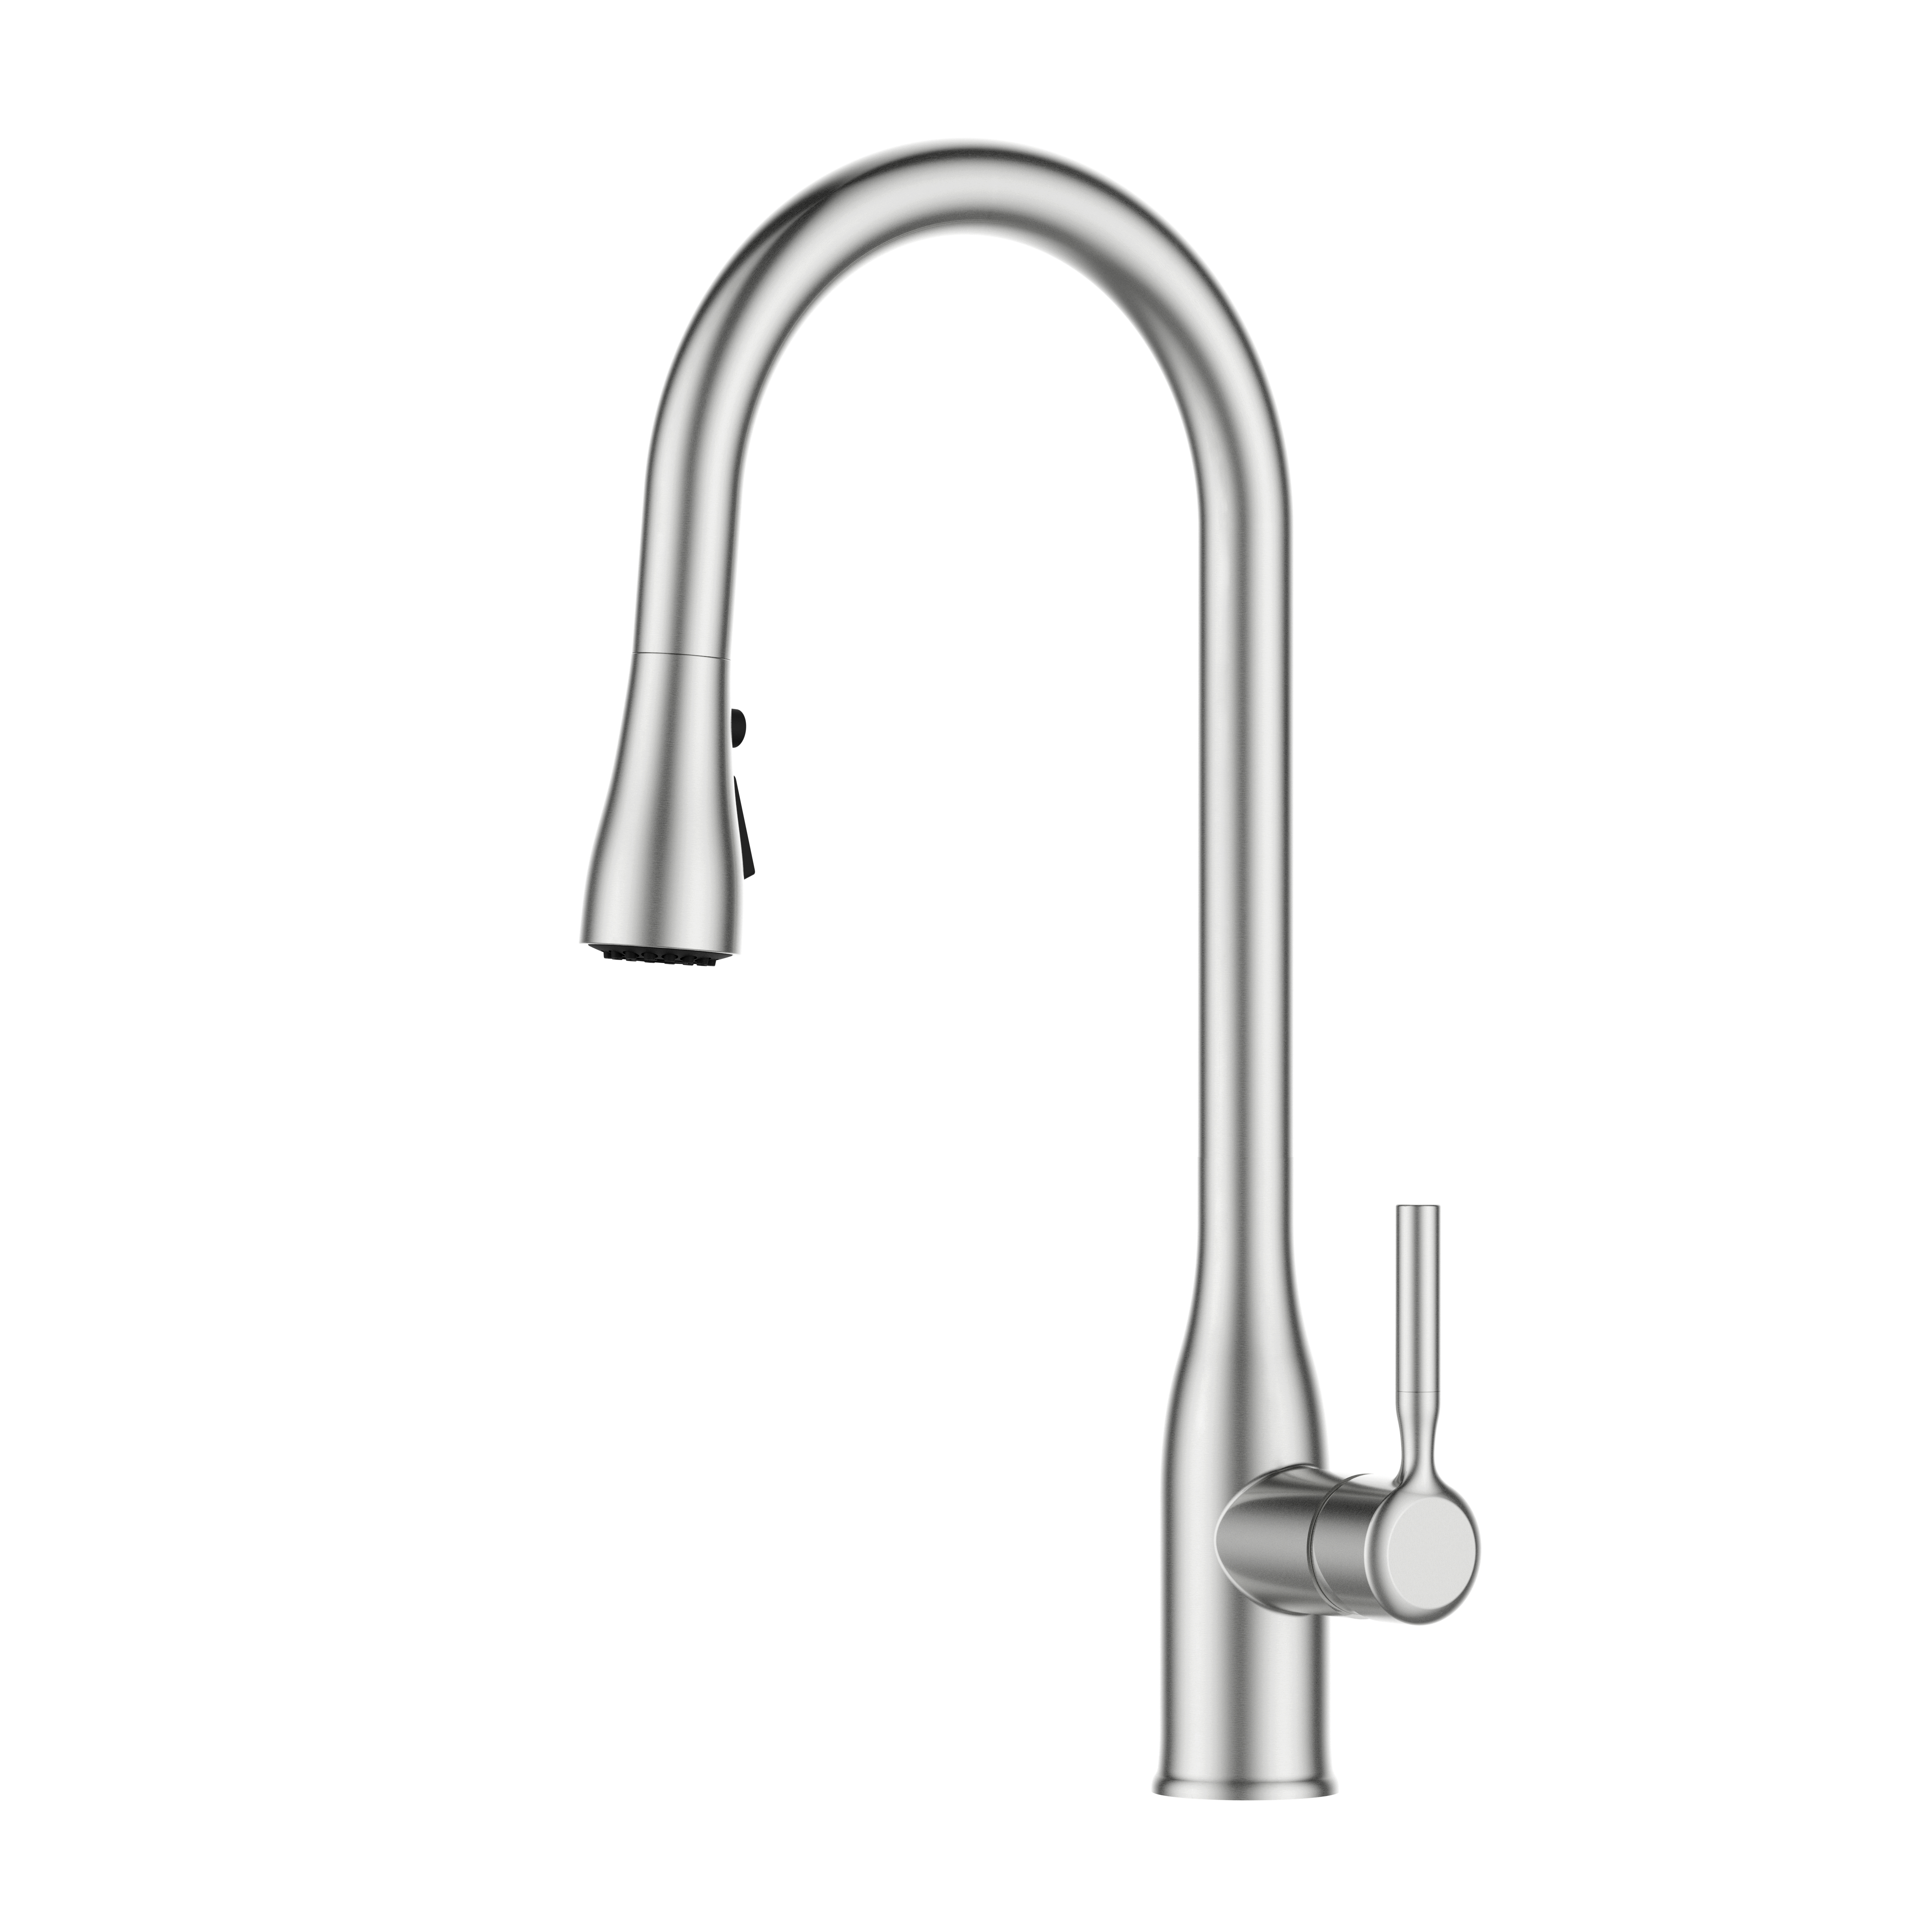 Hot Selling Kitchen Faucet Brushed Nickel